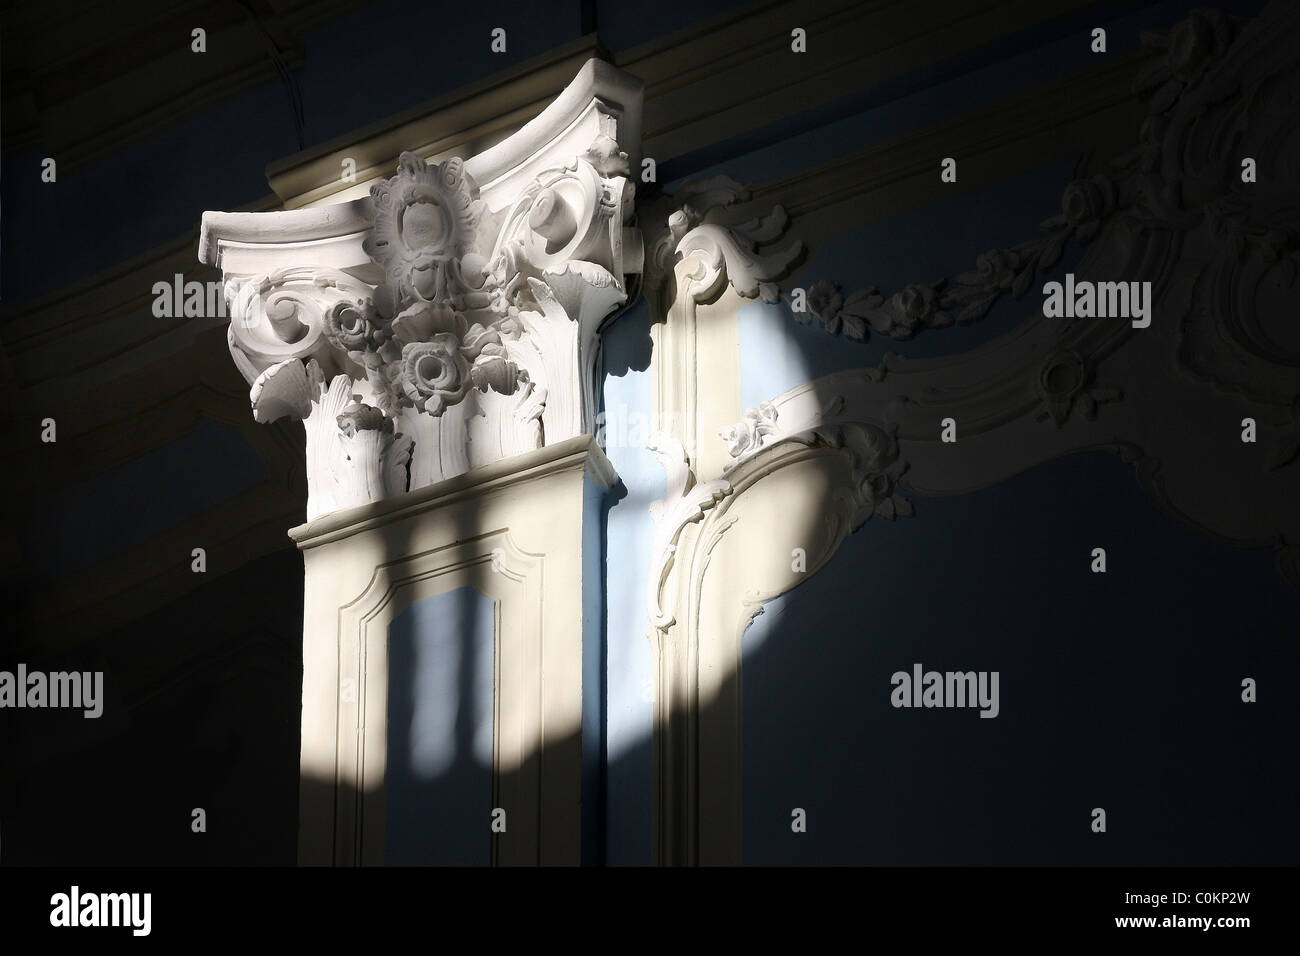 Architectural detail in the baroque style Stock Photo